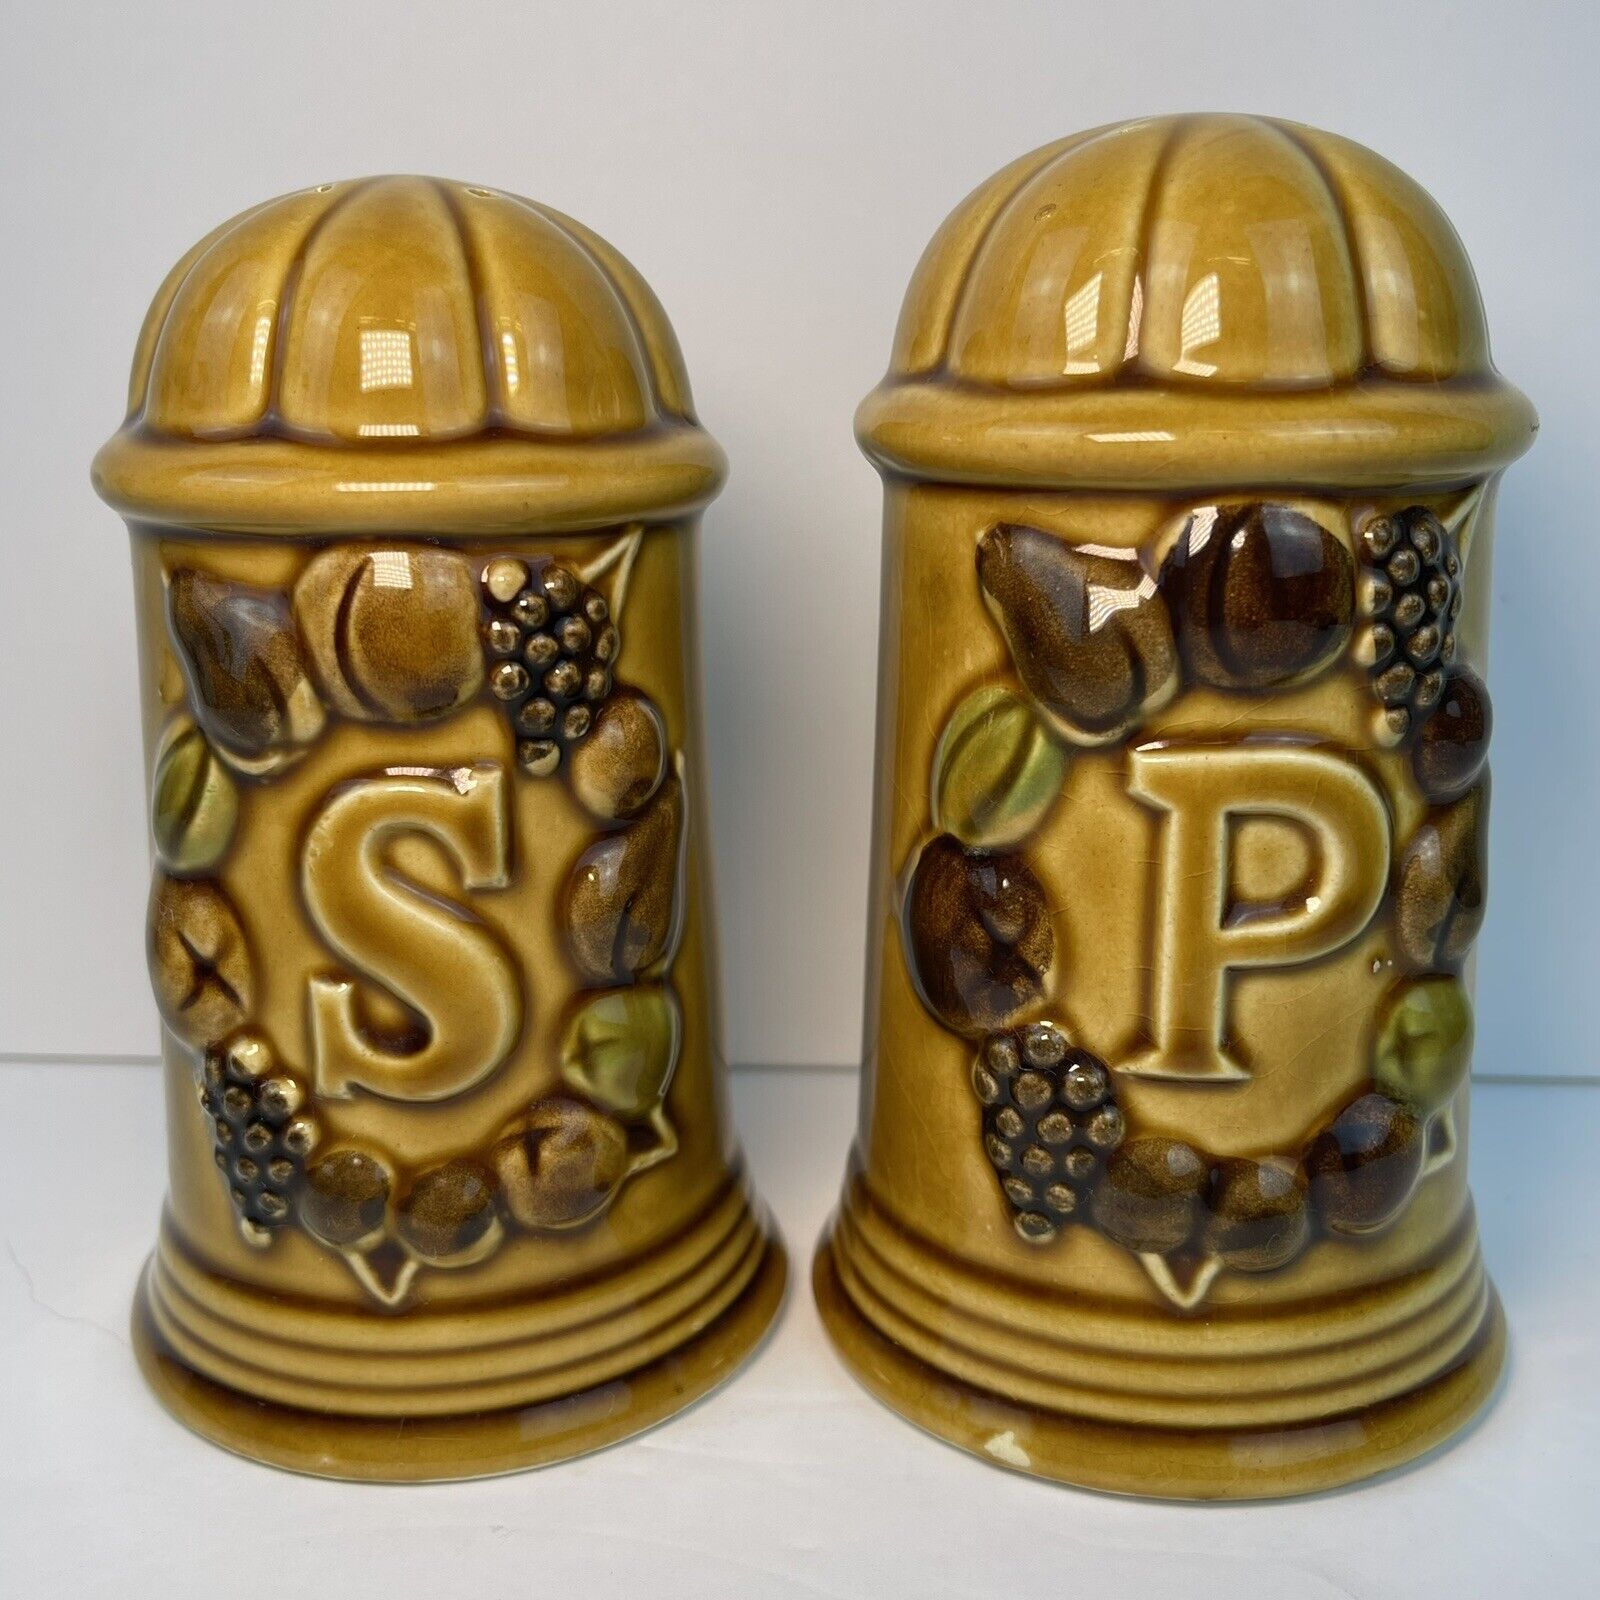 Vintage Retro Style Salt and Pepper shakers - (pre-owned)